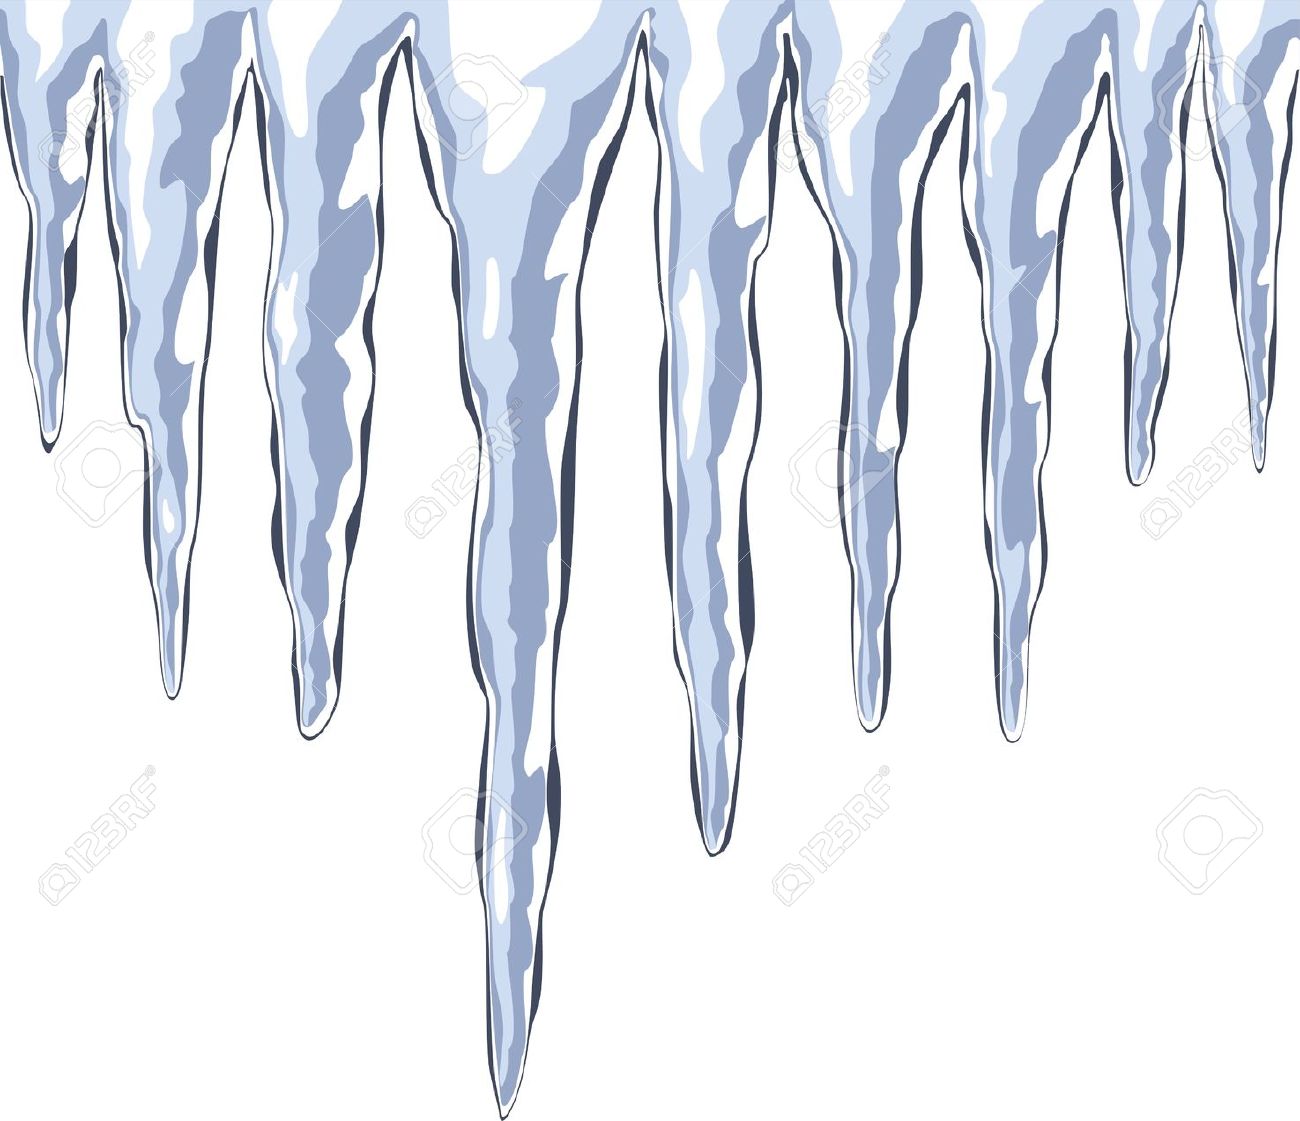 Icicle clipart free - ClipartFest